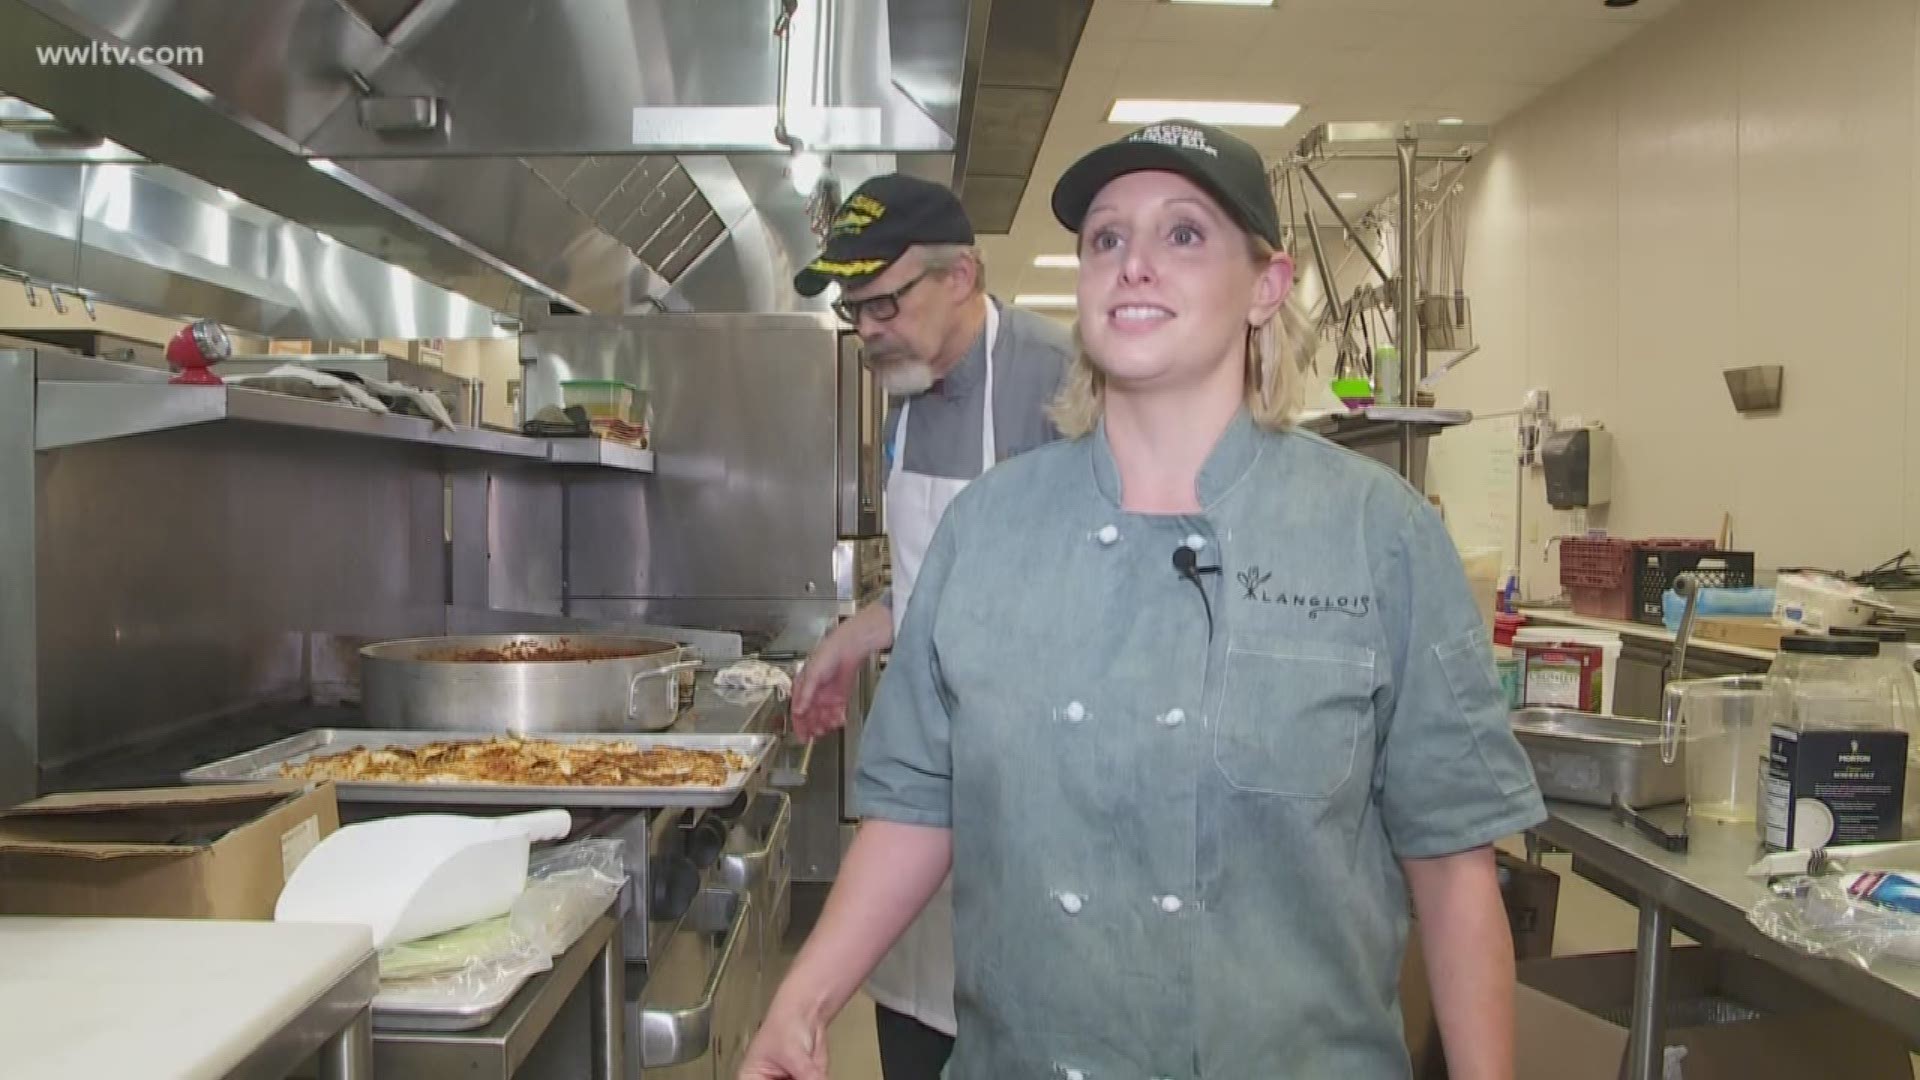 New Orleans chefs prepare meals for Hurricane Florence victims